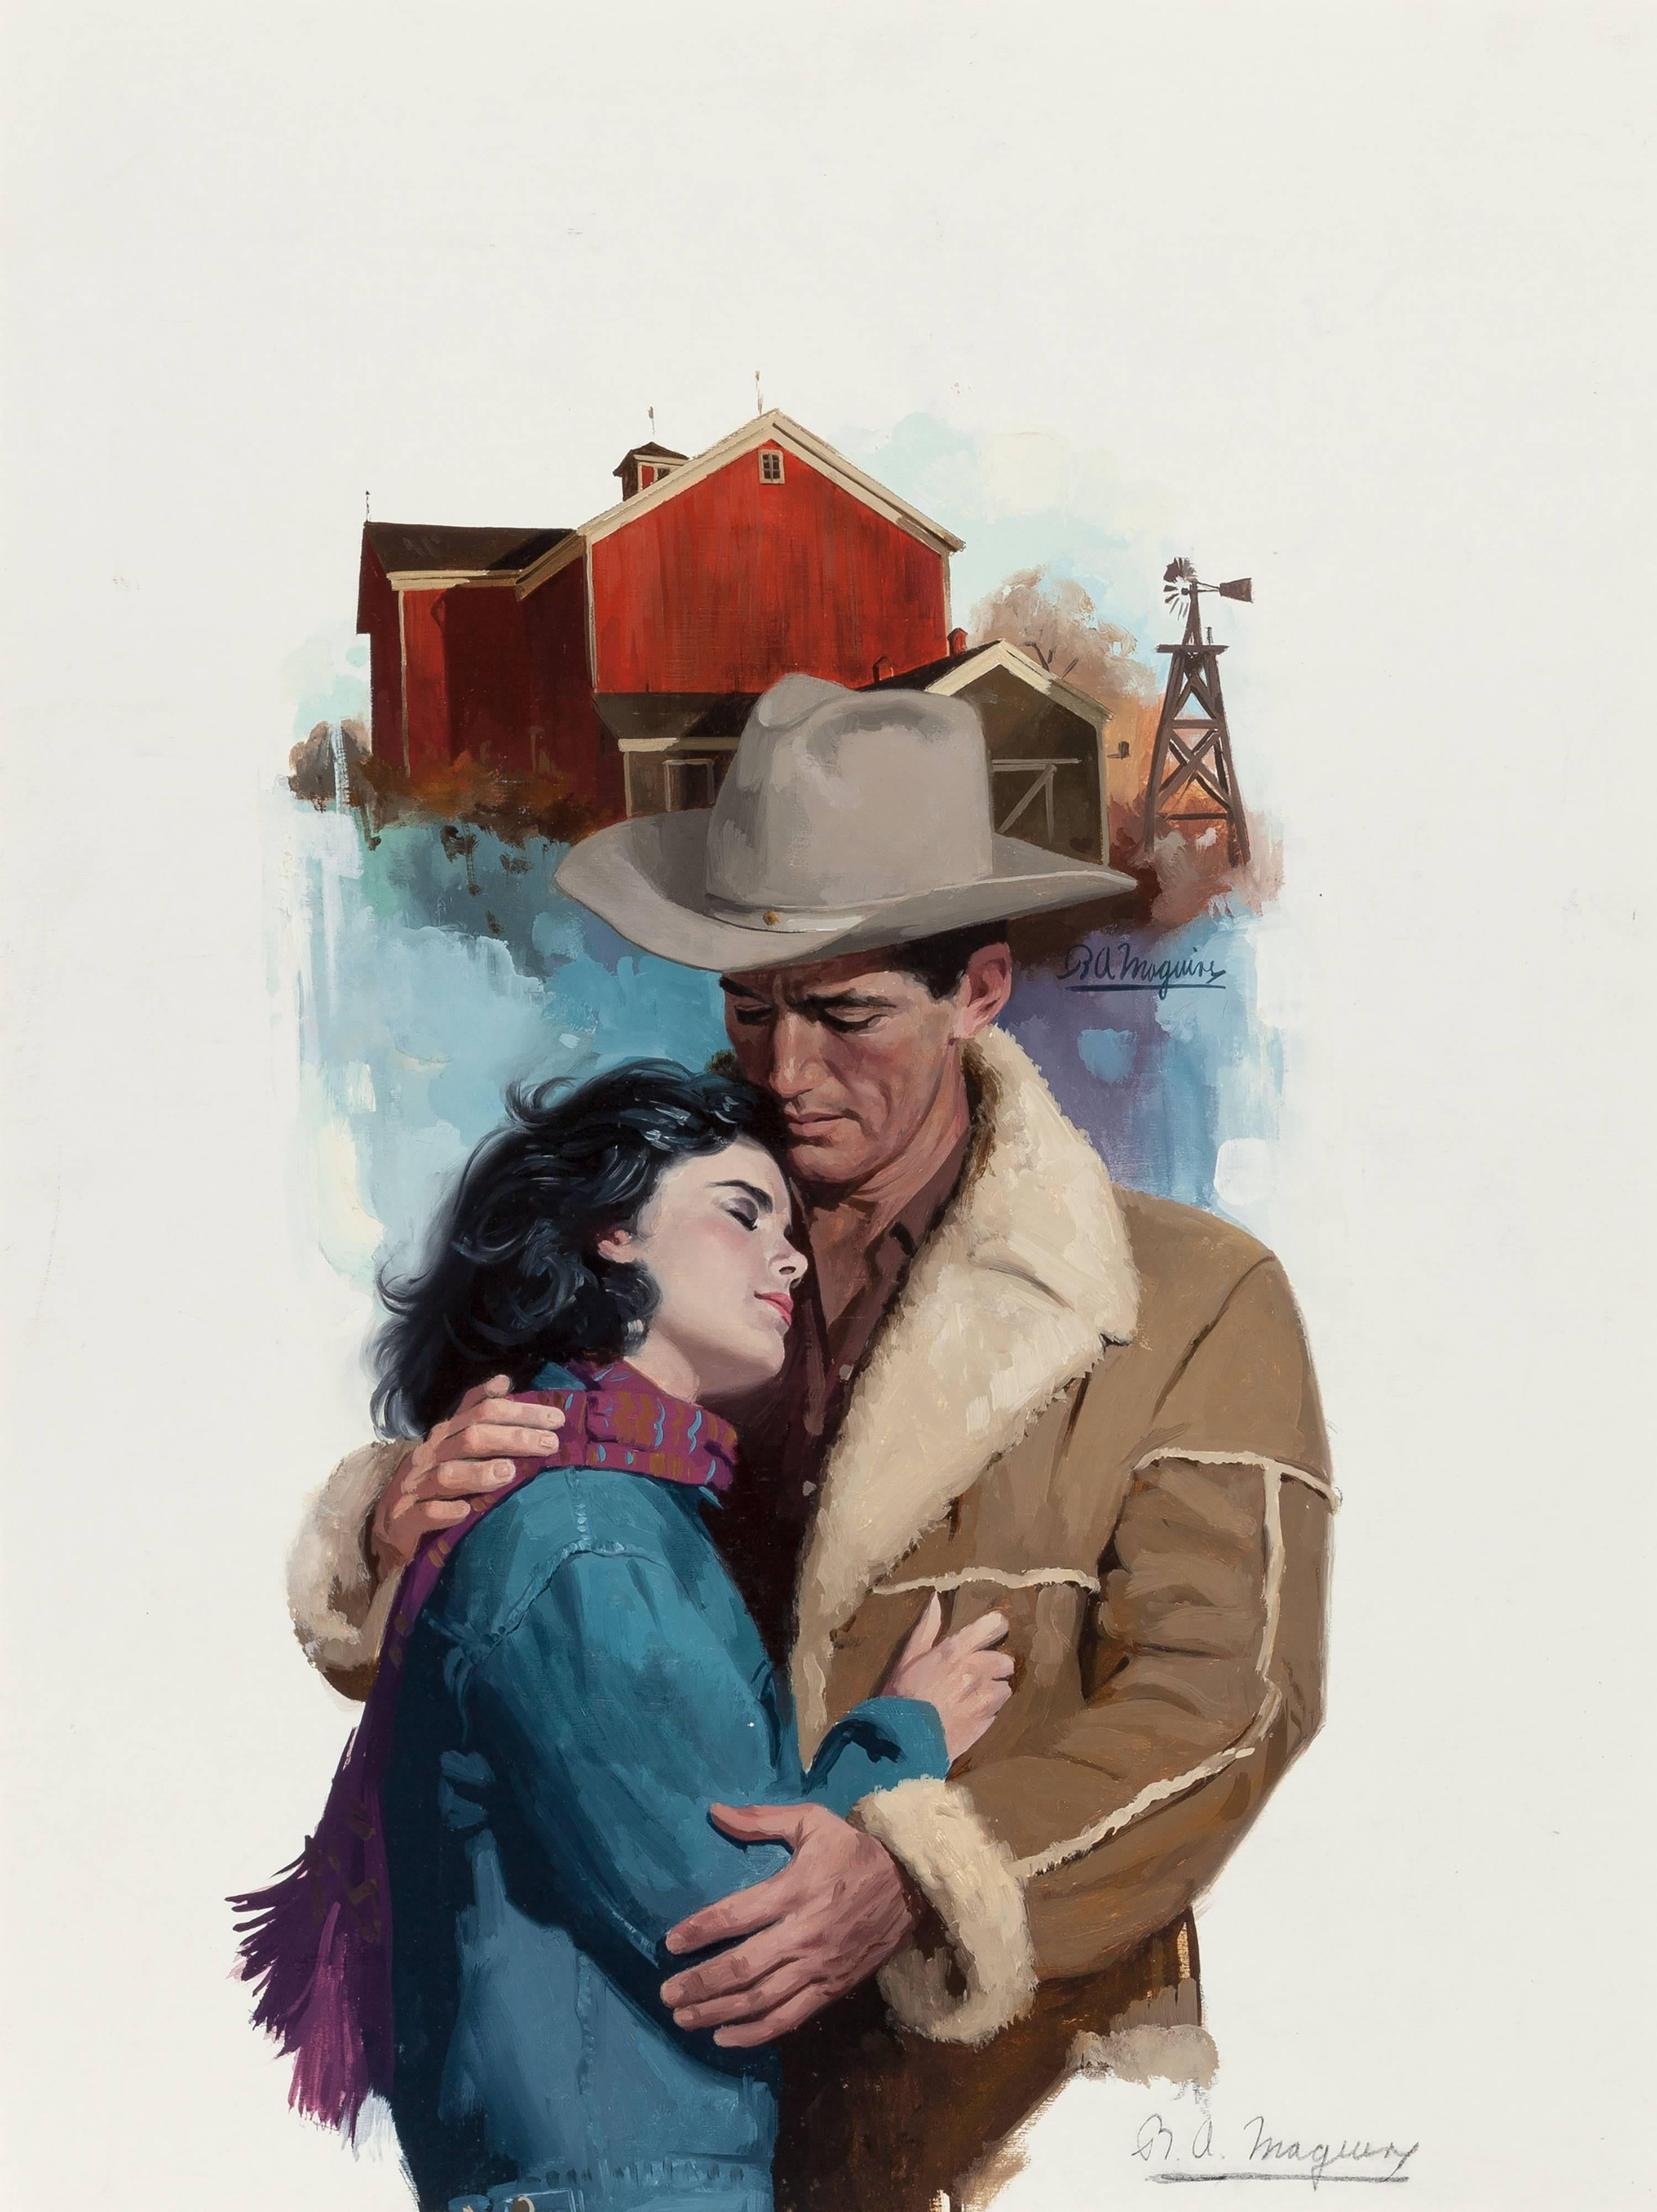 Robert Maguire Figurative Painting - Leftover Love, Paperback Cover